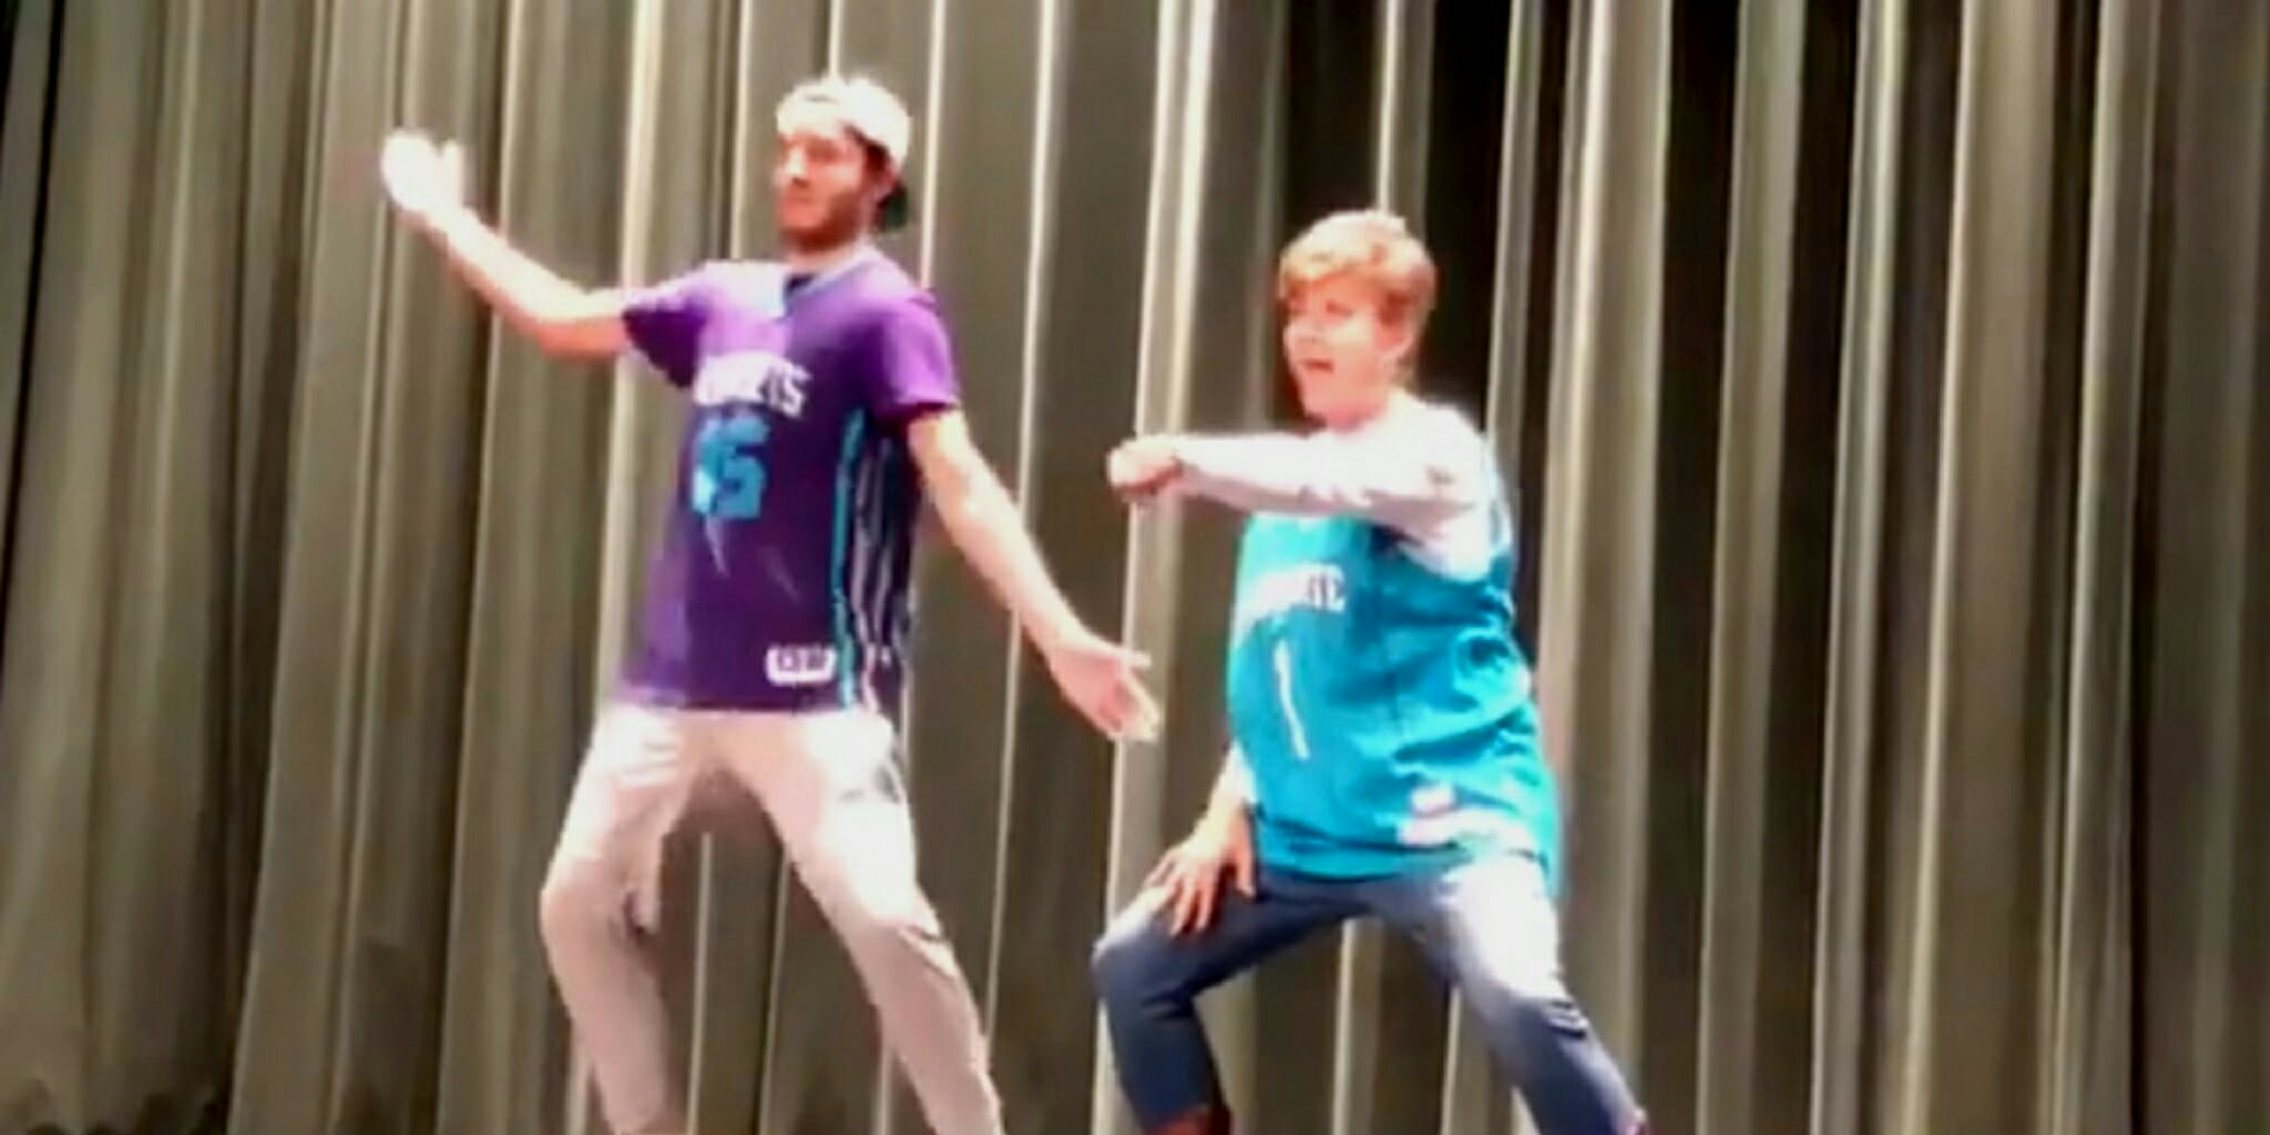 Ginny Jenkins and her son go viral with 'History of Dance' routine